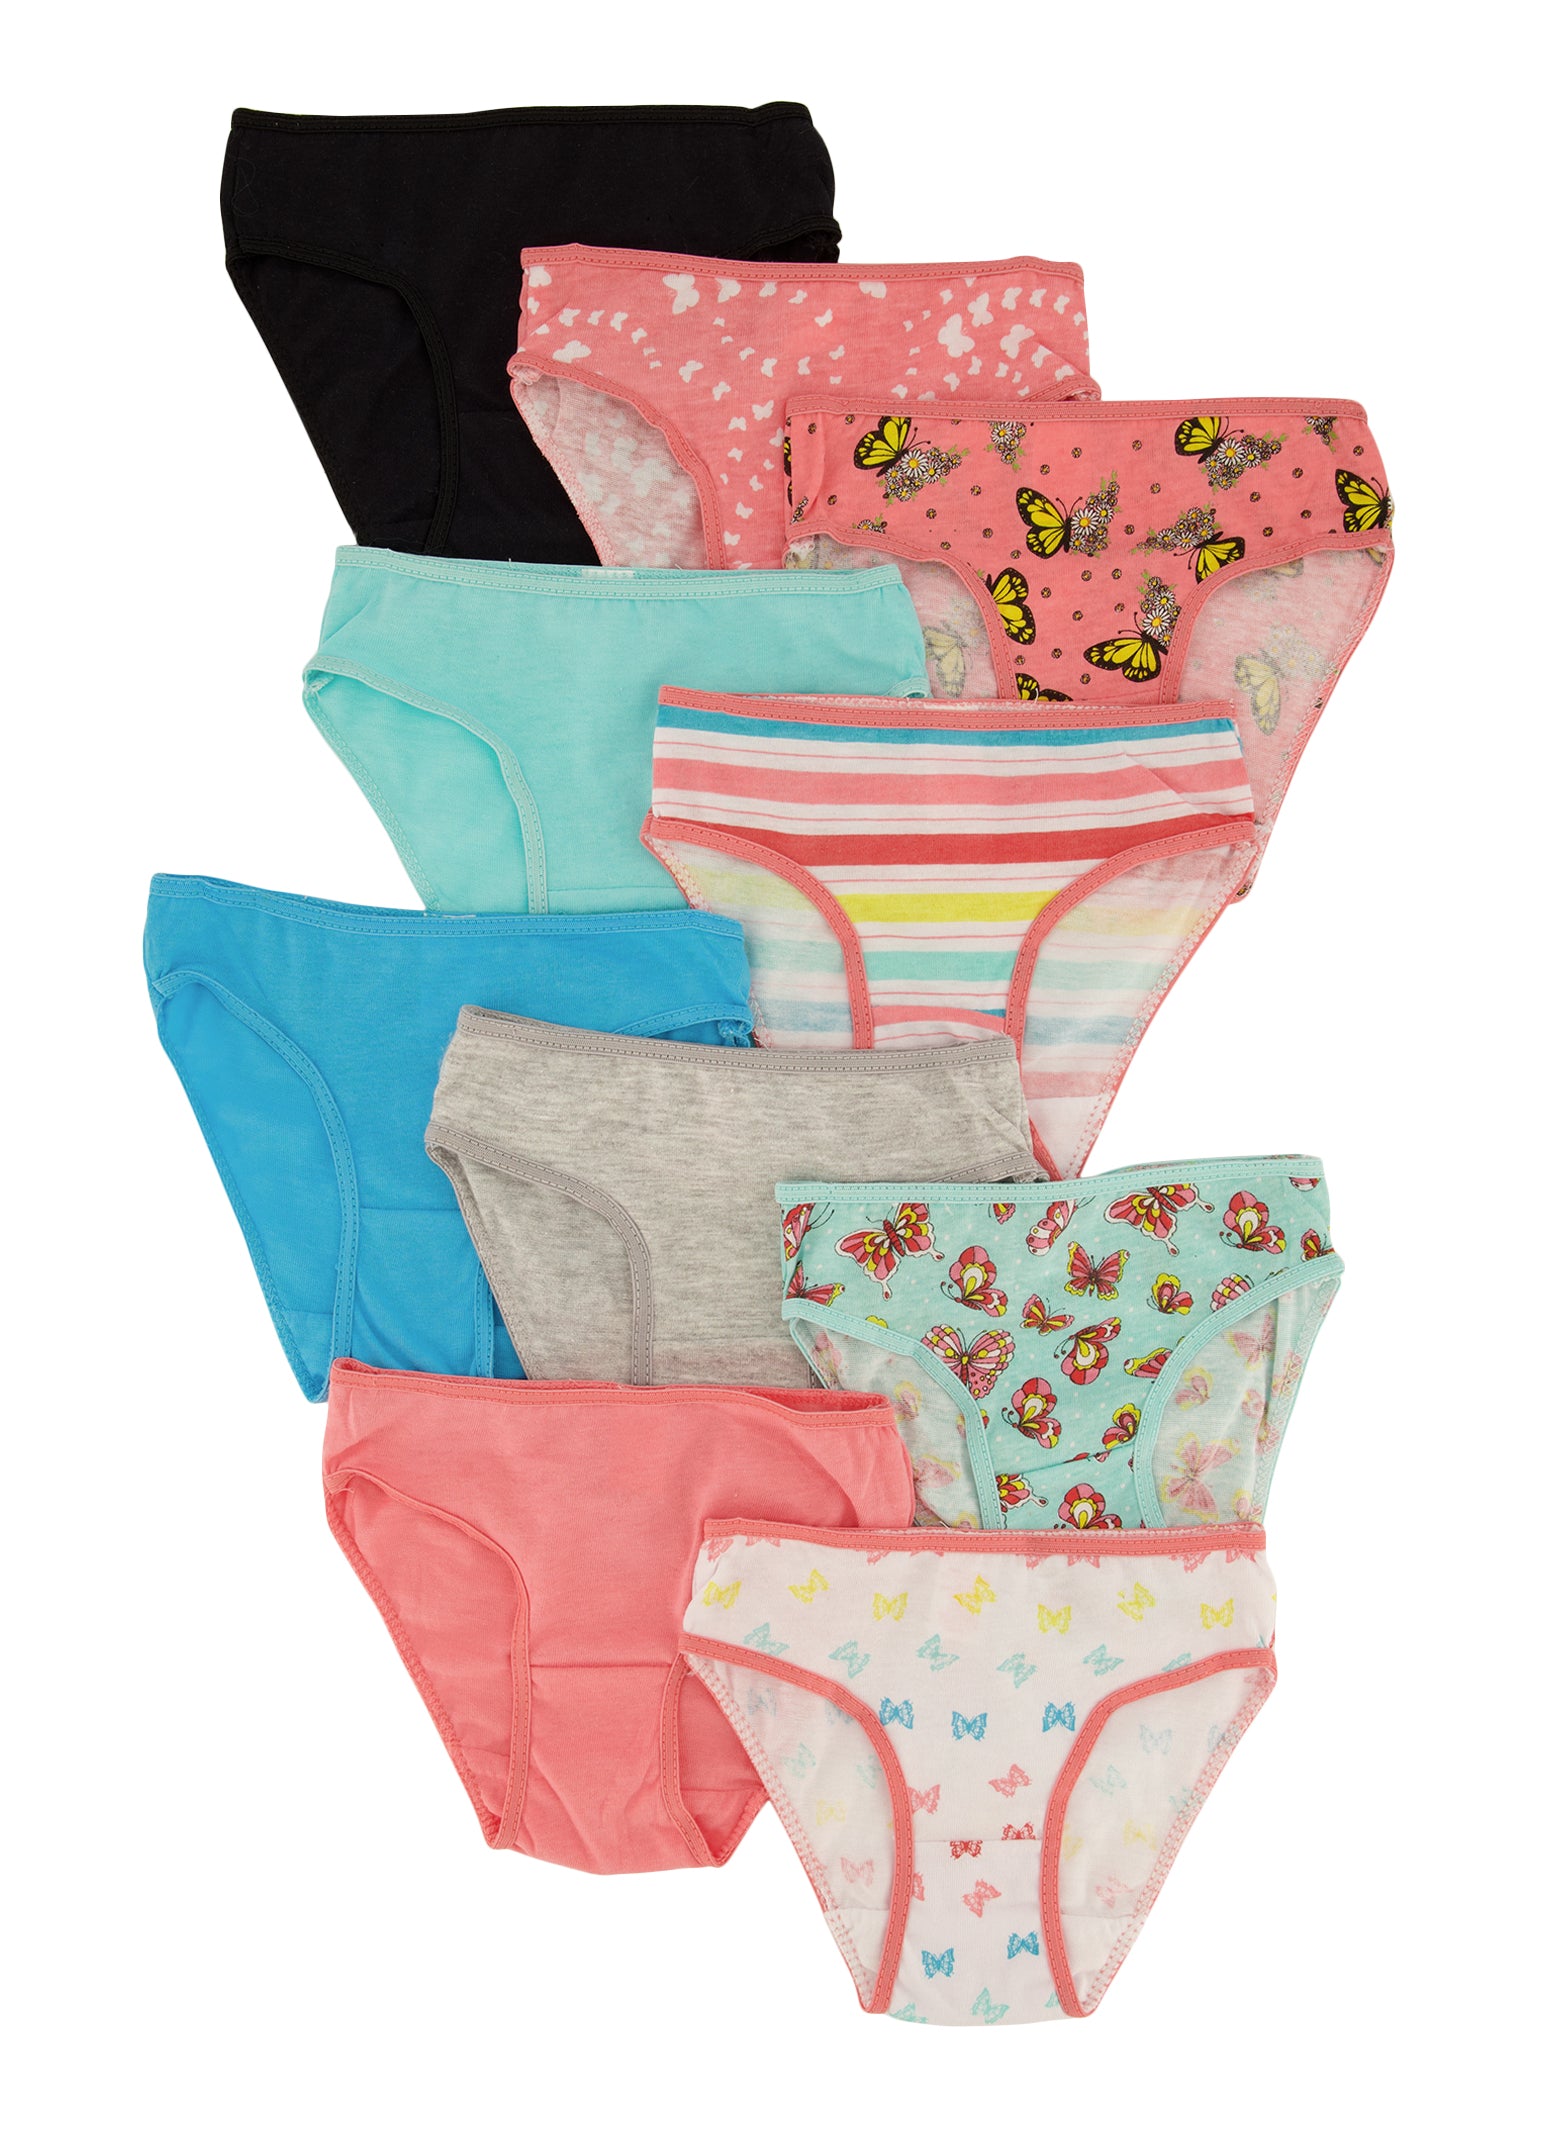 Womens Little Girls 10 Pack Butterfly Print Assorted Panties, Multi, Size 4